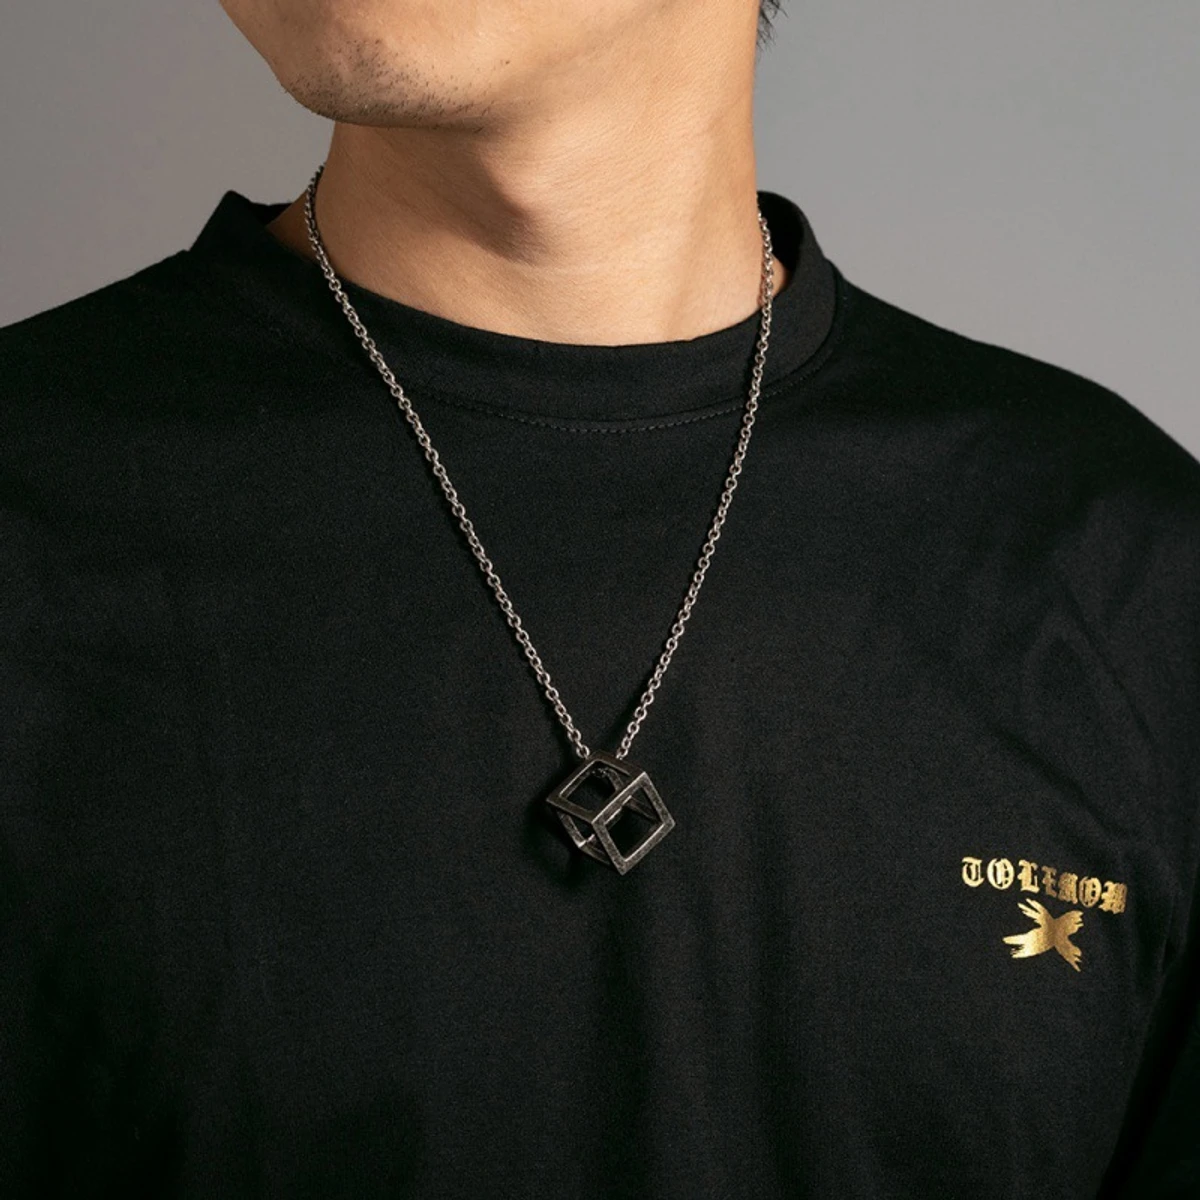 New Stainless Steel Stylish Necklaces For Men's